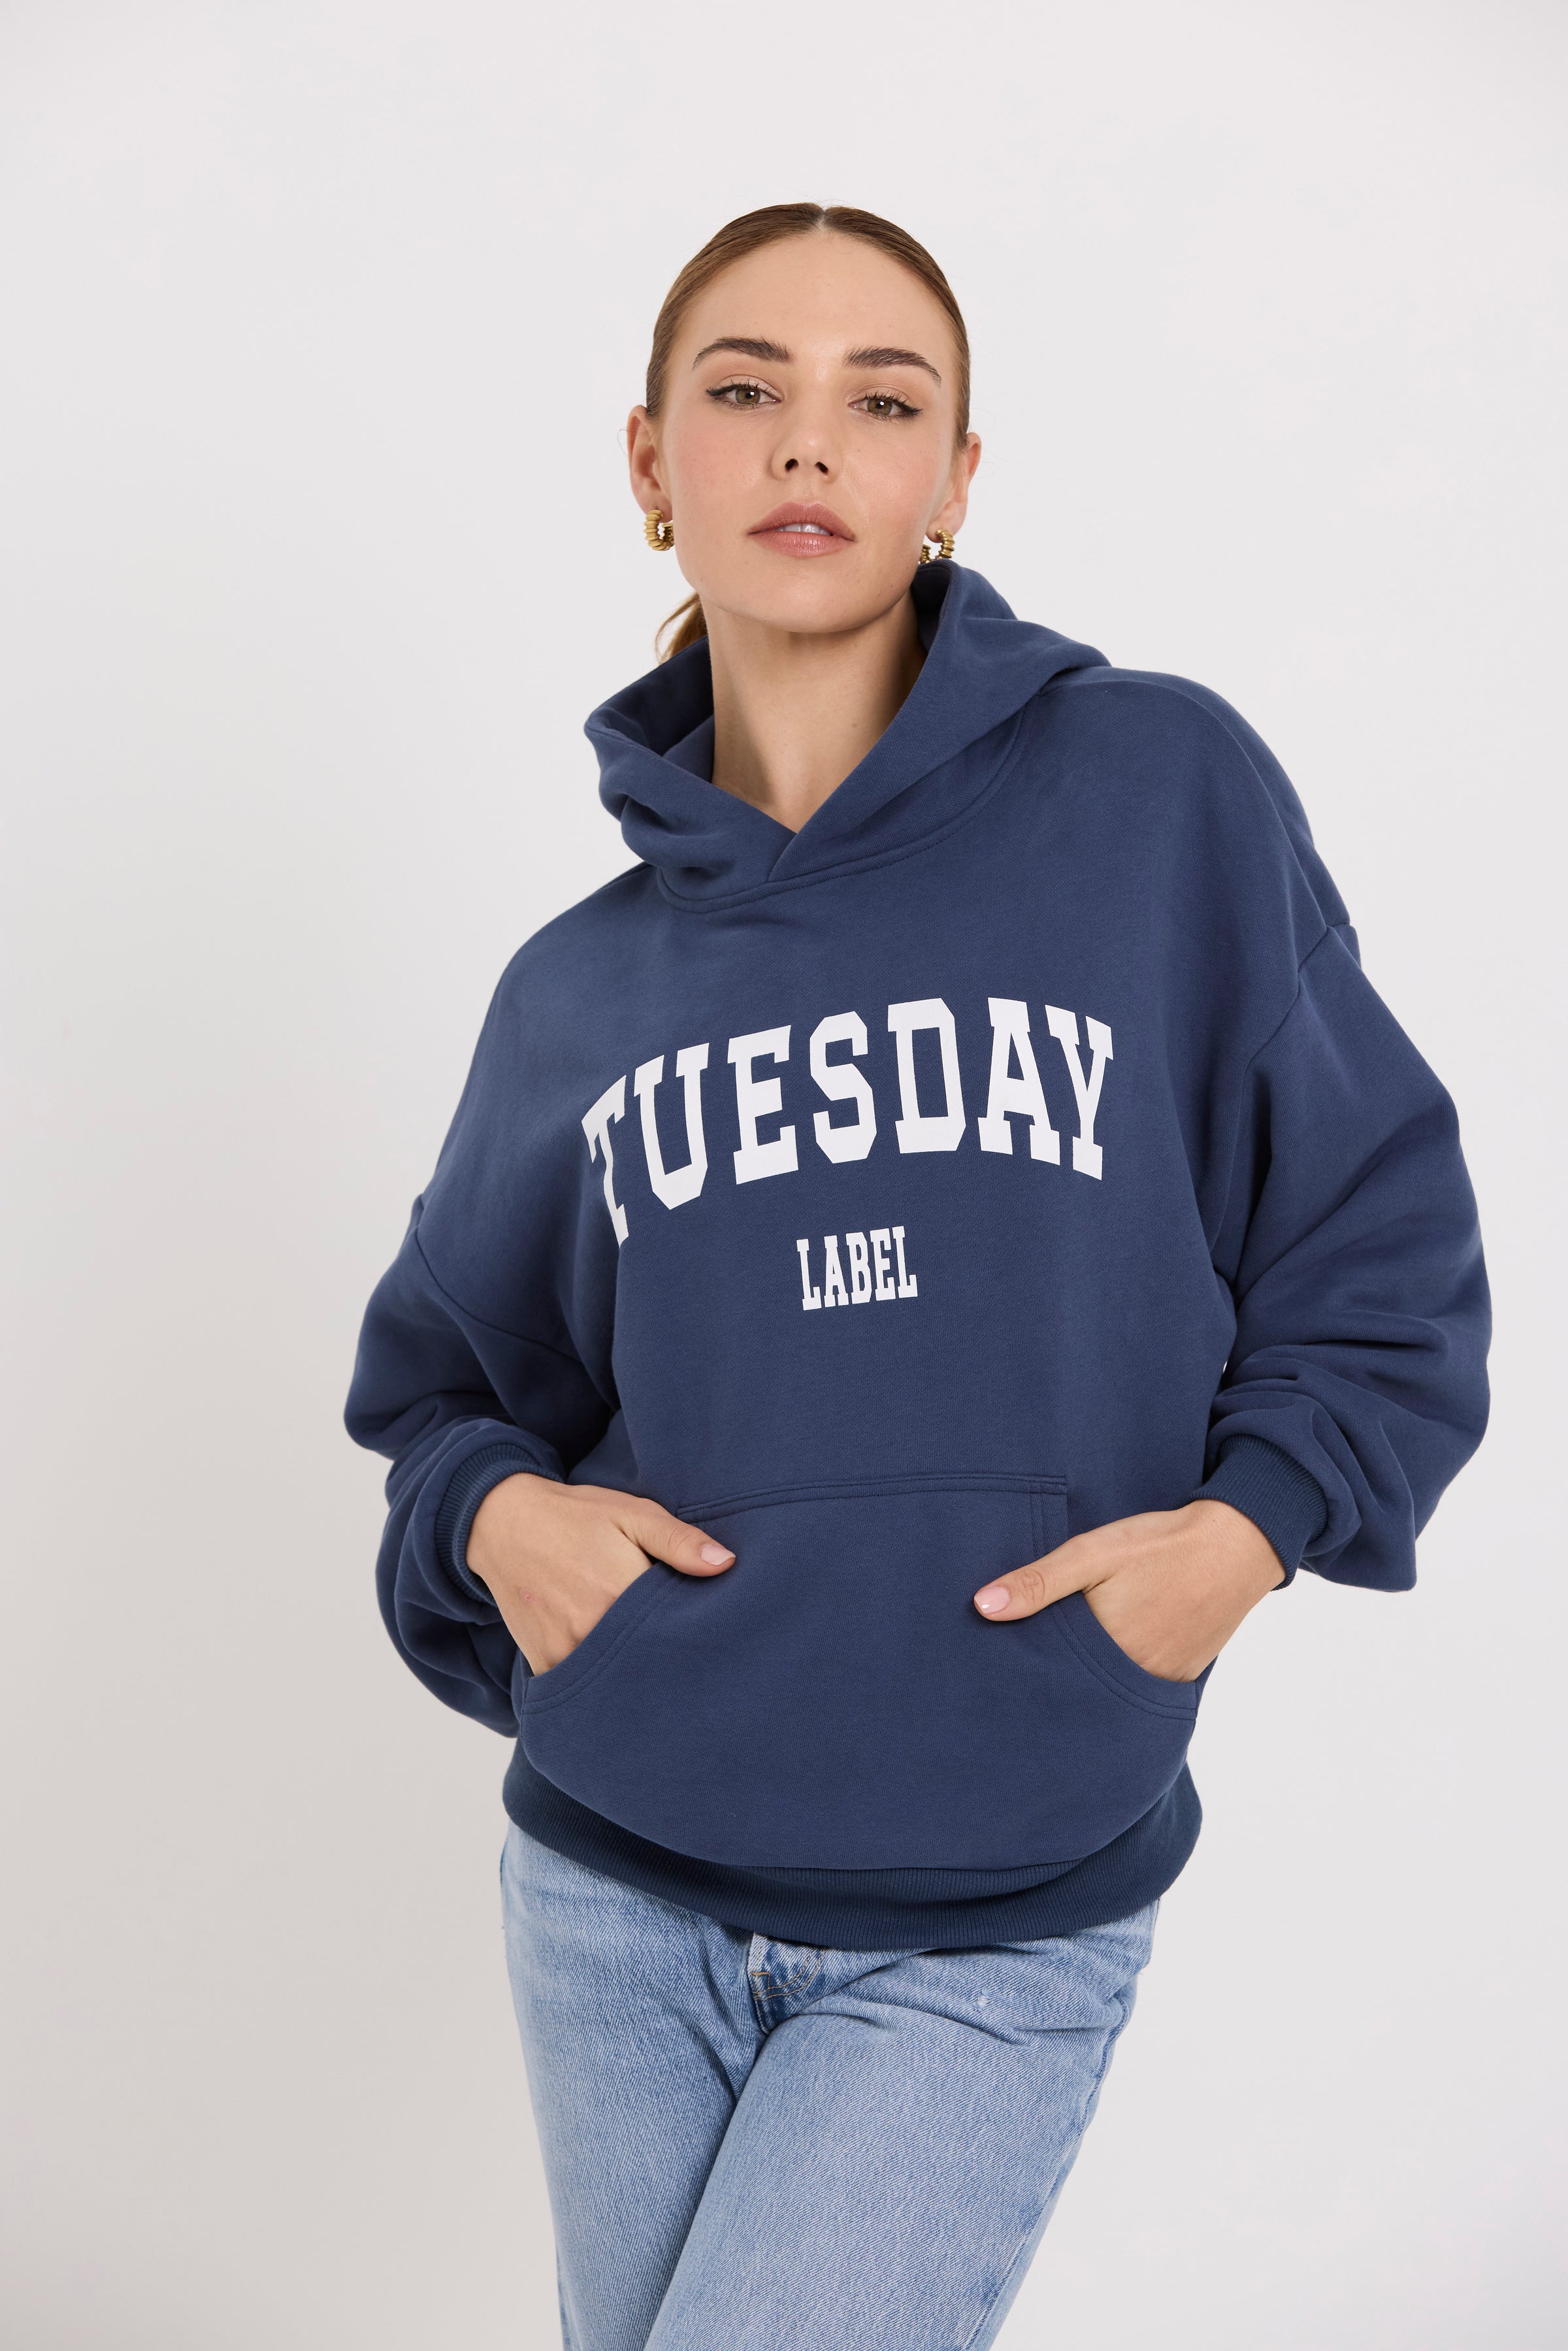 TUESDAY LABEL - Athletic Hoodie